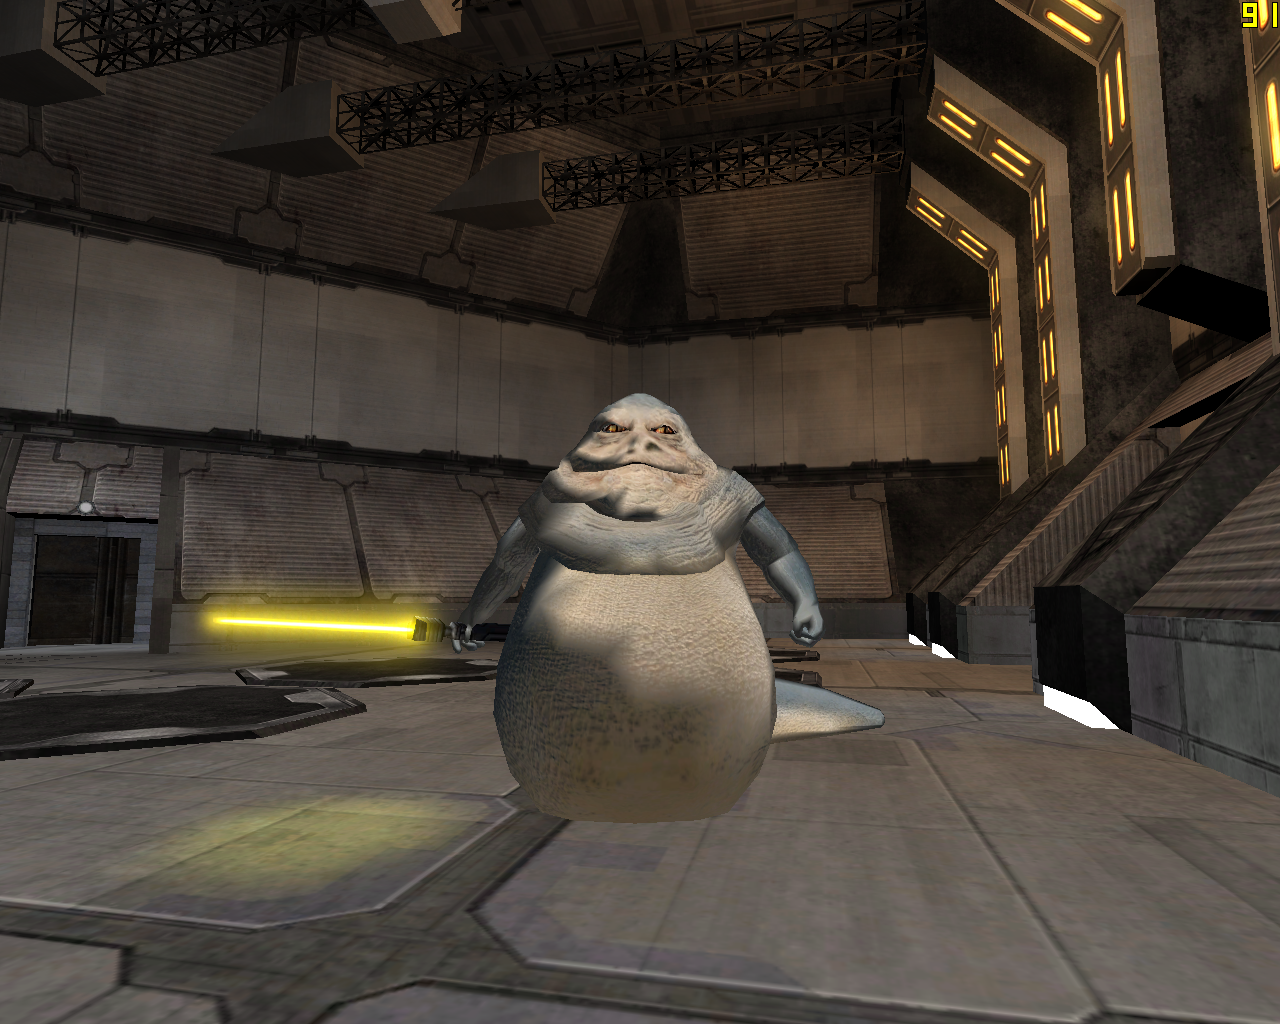 More information about "Jabba the Hutt"